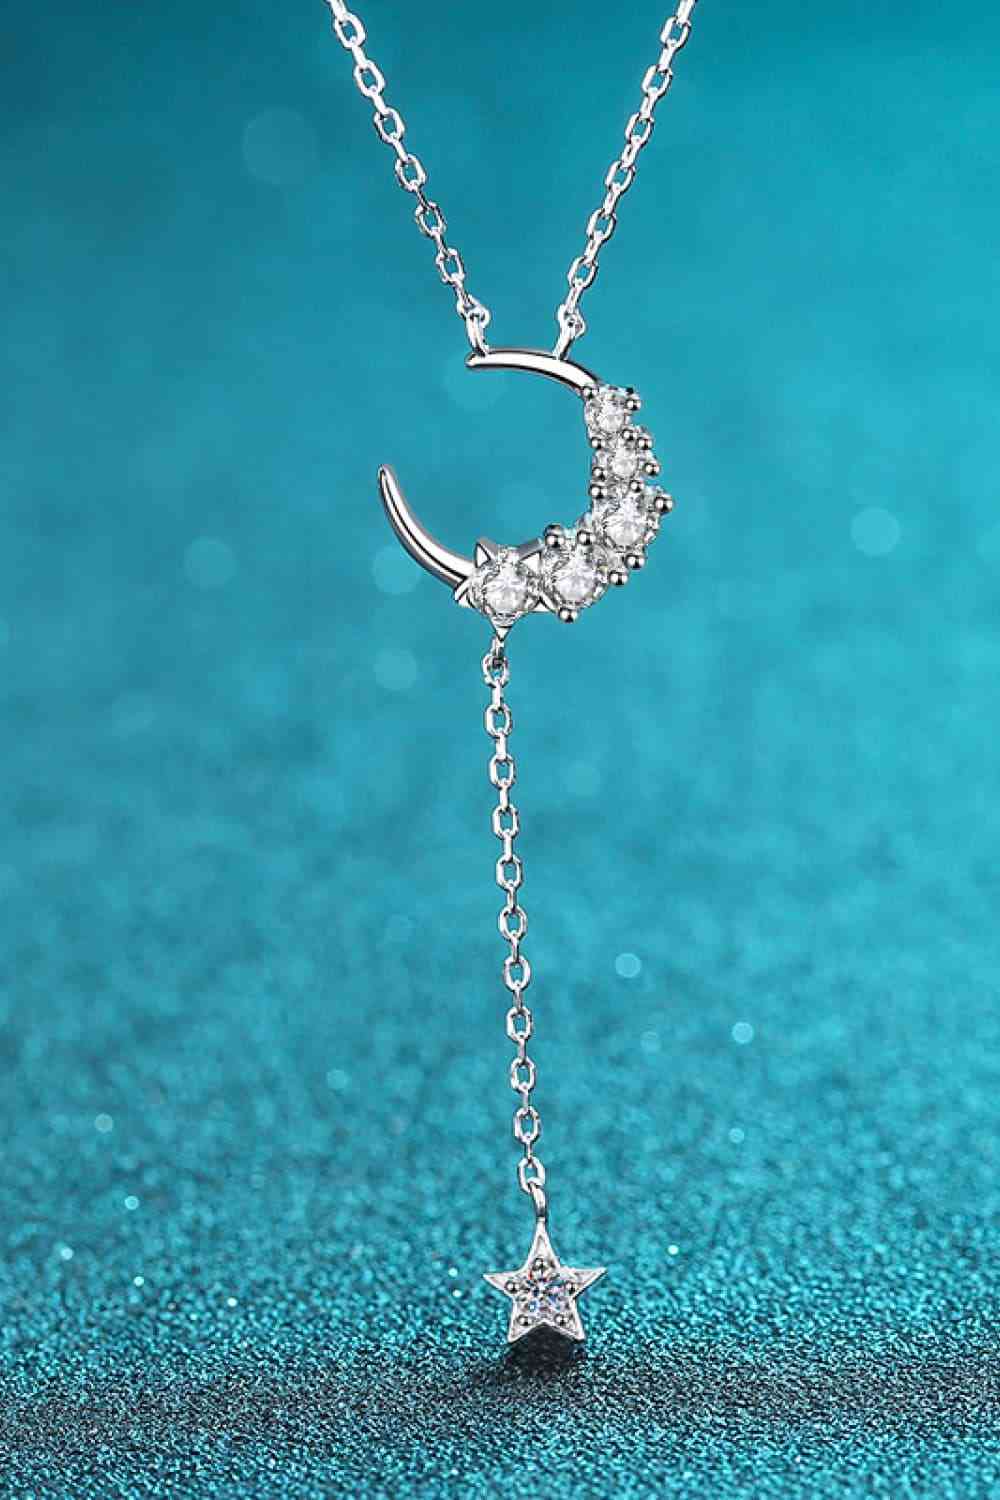 Star & Moon Moissanite Necklace - Shop Tophatter Deals, Electronics, Fashion, Jewelry, Health, Beauty, Home Decor, Free Shipping